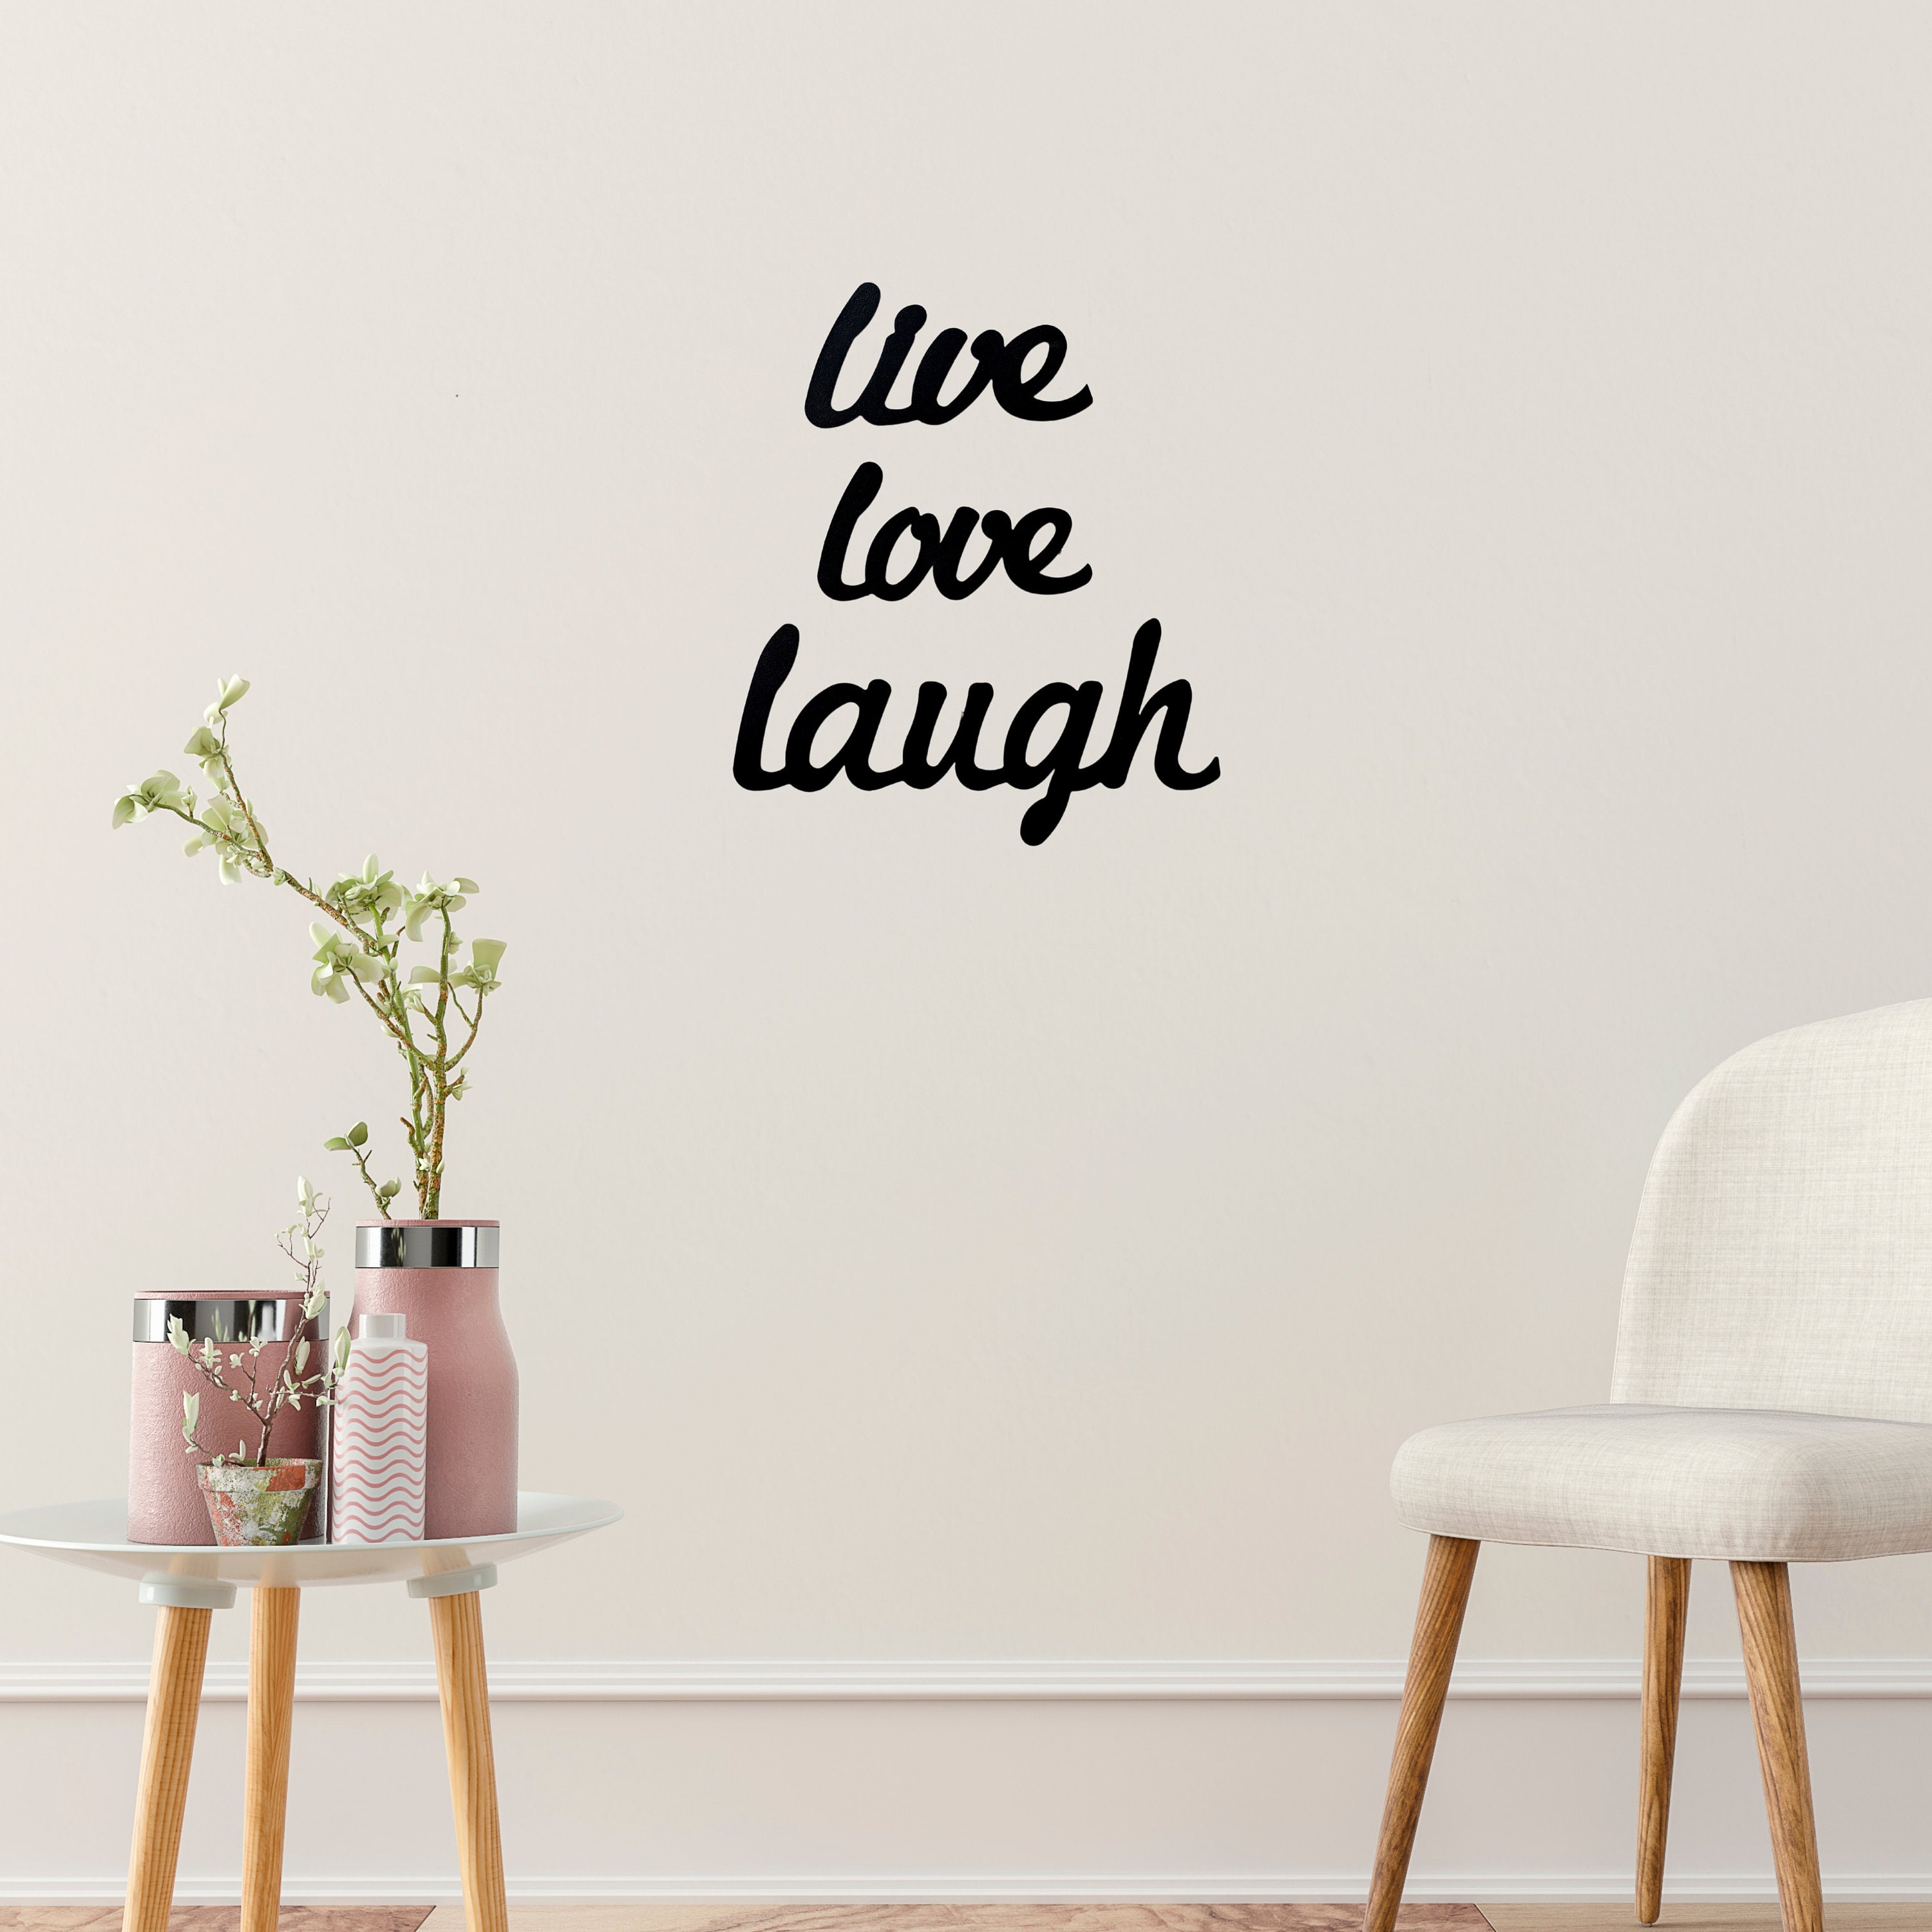 Live Love Laugh Metal Wall Decoration, Wall Art Funny, Office